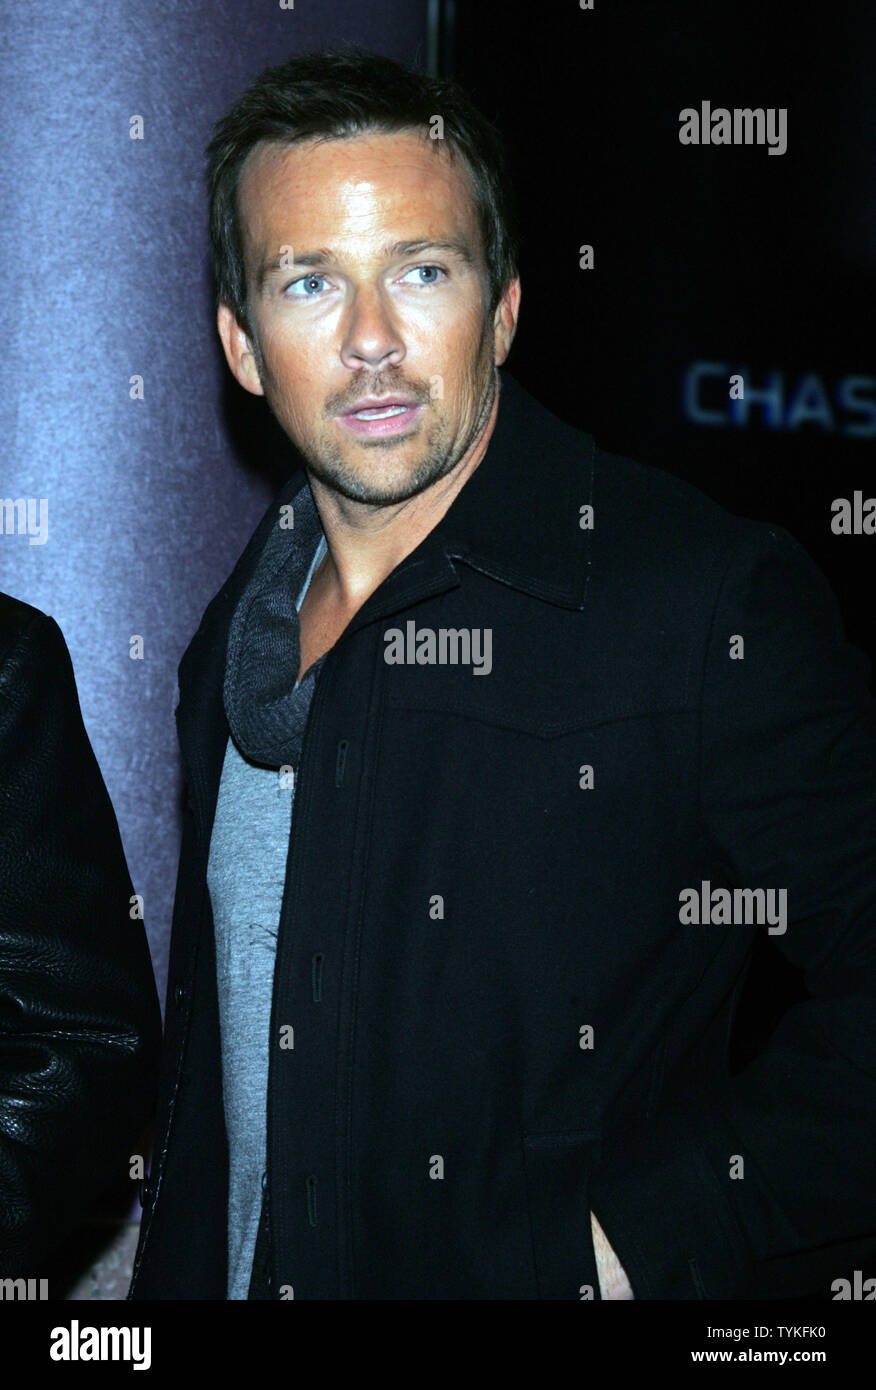 Sean Patrick Flanery arrives for the premiere of 'The Boondock Saints II: All Saints Day' at the Regal Union Square Theater in New York on October 20, 2009.       UPI /Laura Cavanaugh Stock Photo